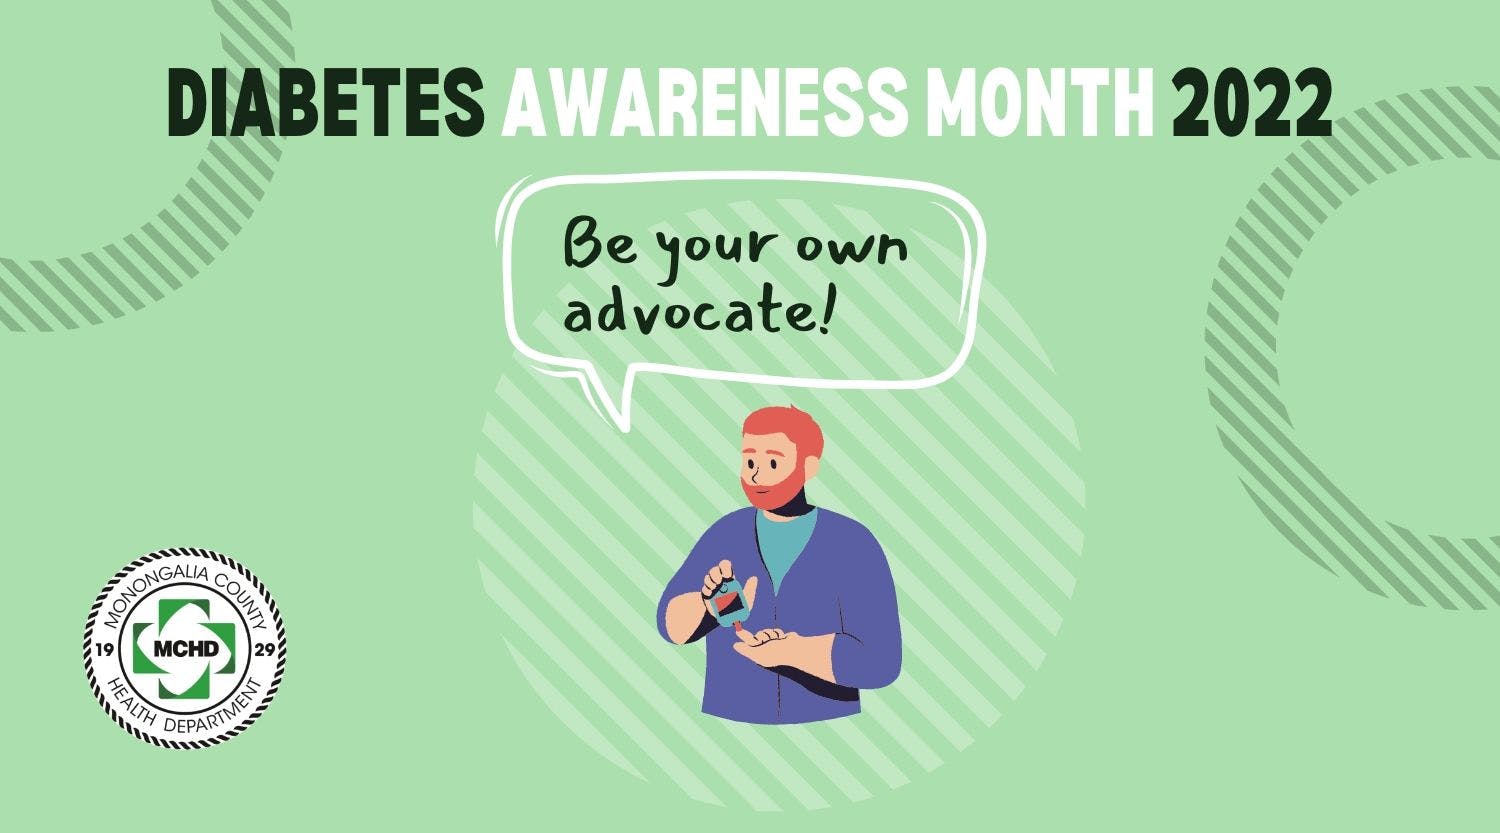 Be your own advocate during Diabetes Awareness Month